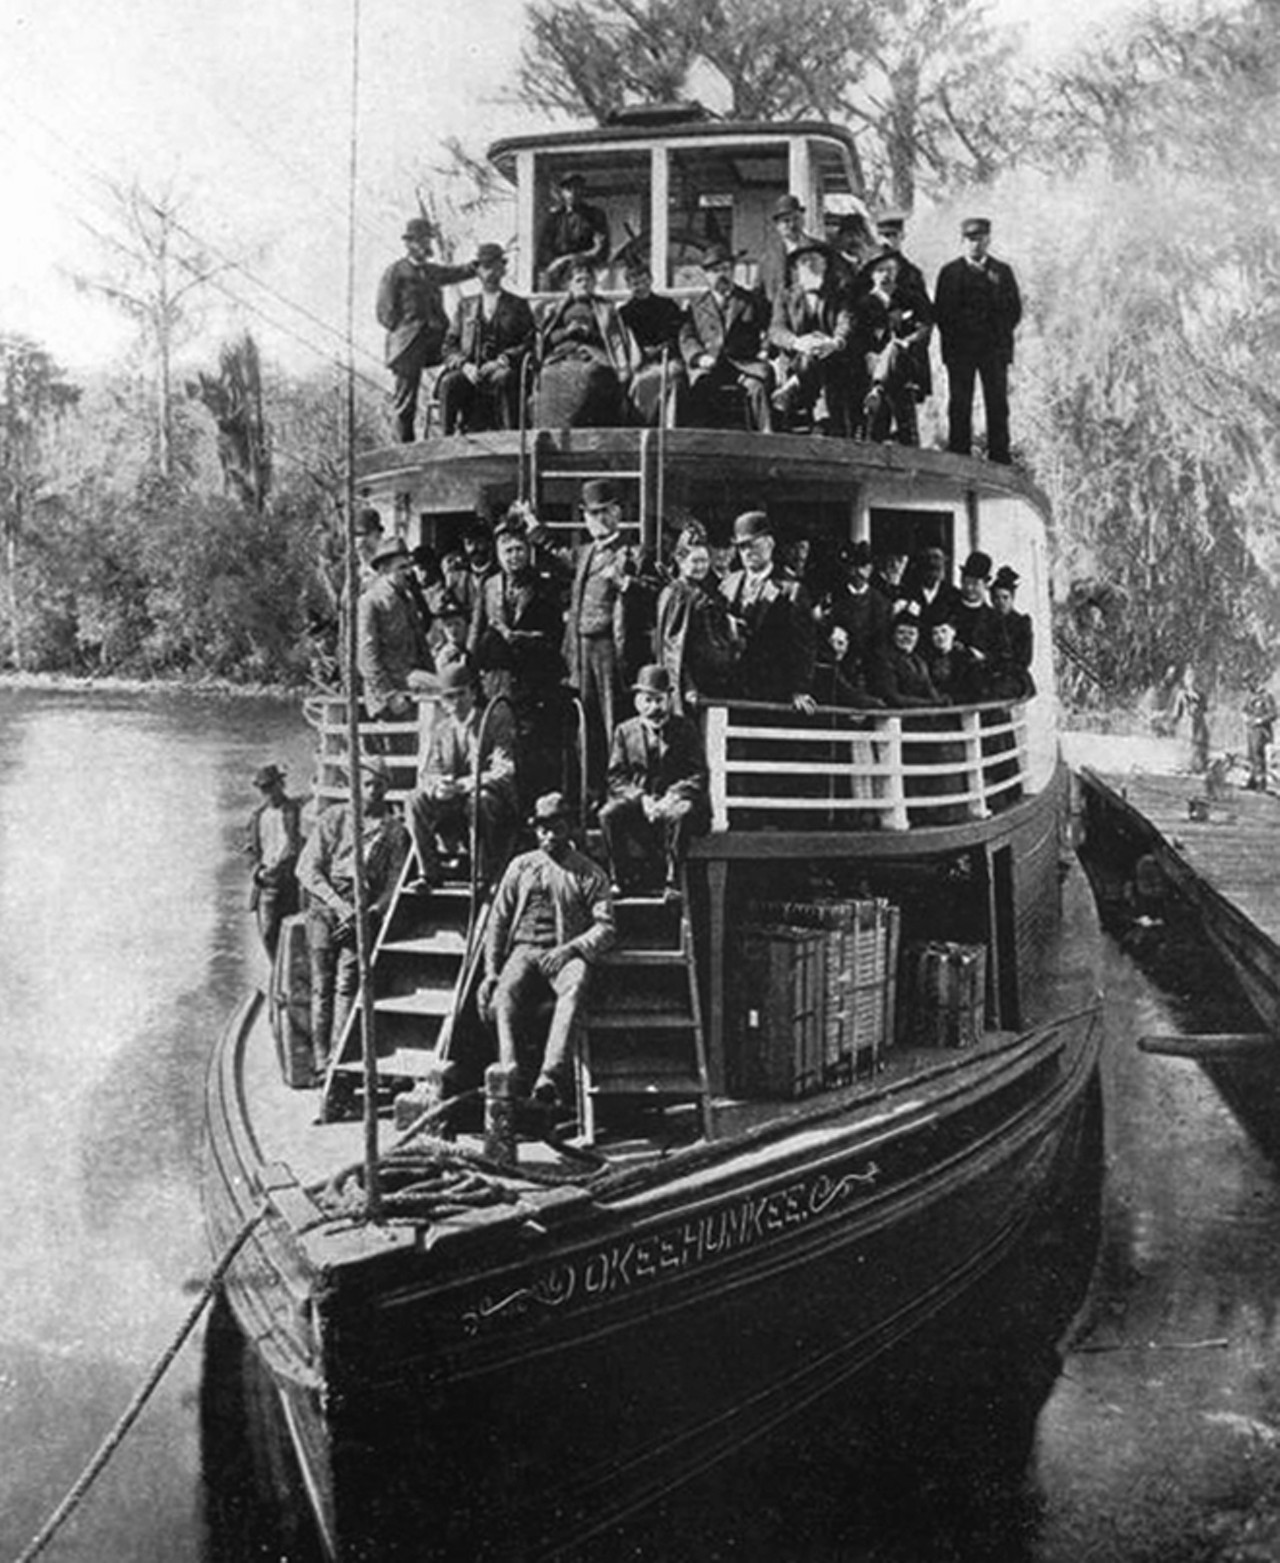 Tourists aboard the river steamboat Okeehumkee at Silver Springs, Florida. Hubbard Hart built the boat in 1873 for his Hart Line. He hired many African American men as captains and crew. By permission of the State Archives of Florida. Reprinted with permission of the University Press of Florida.